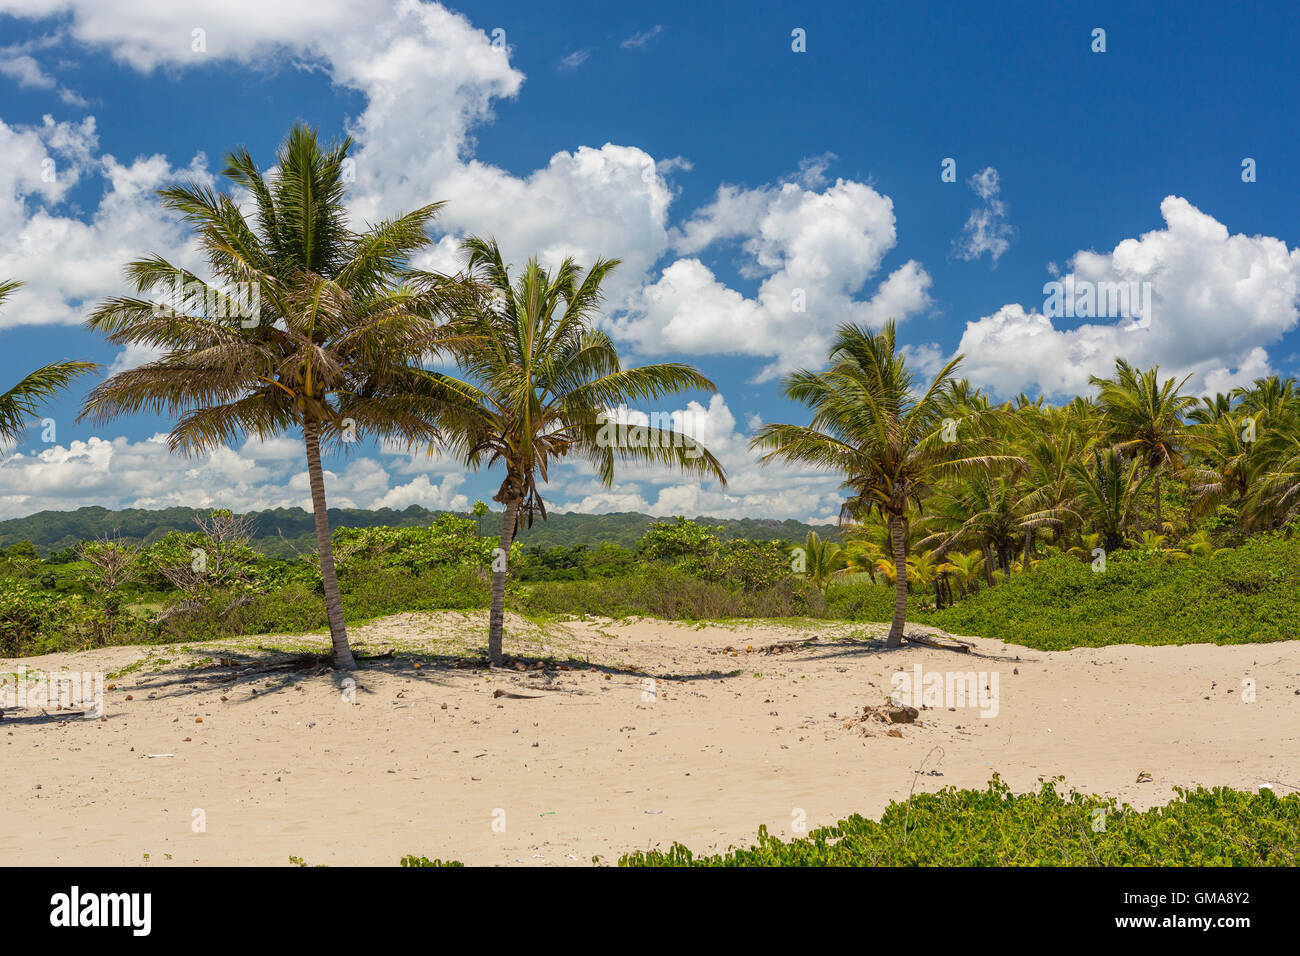 DOMINICAN REPUBLIC - Beach landscape with palm trees at mouth of Yasica River, near Cabarete. Stock Photo